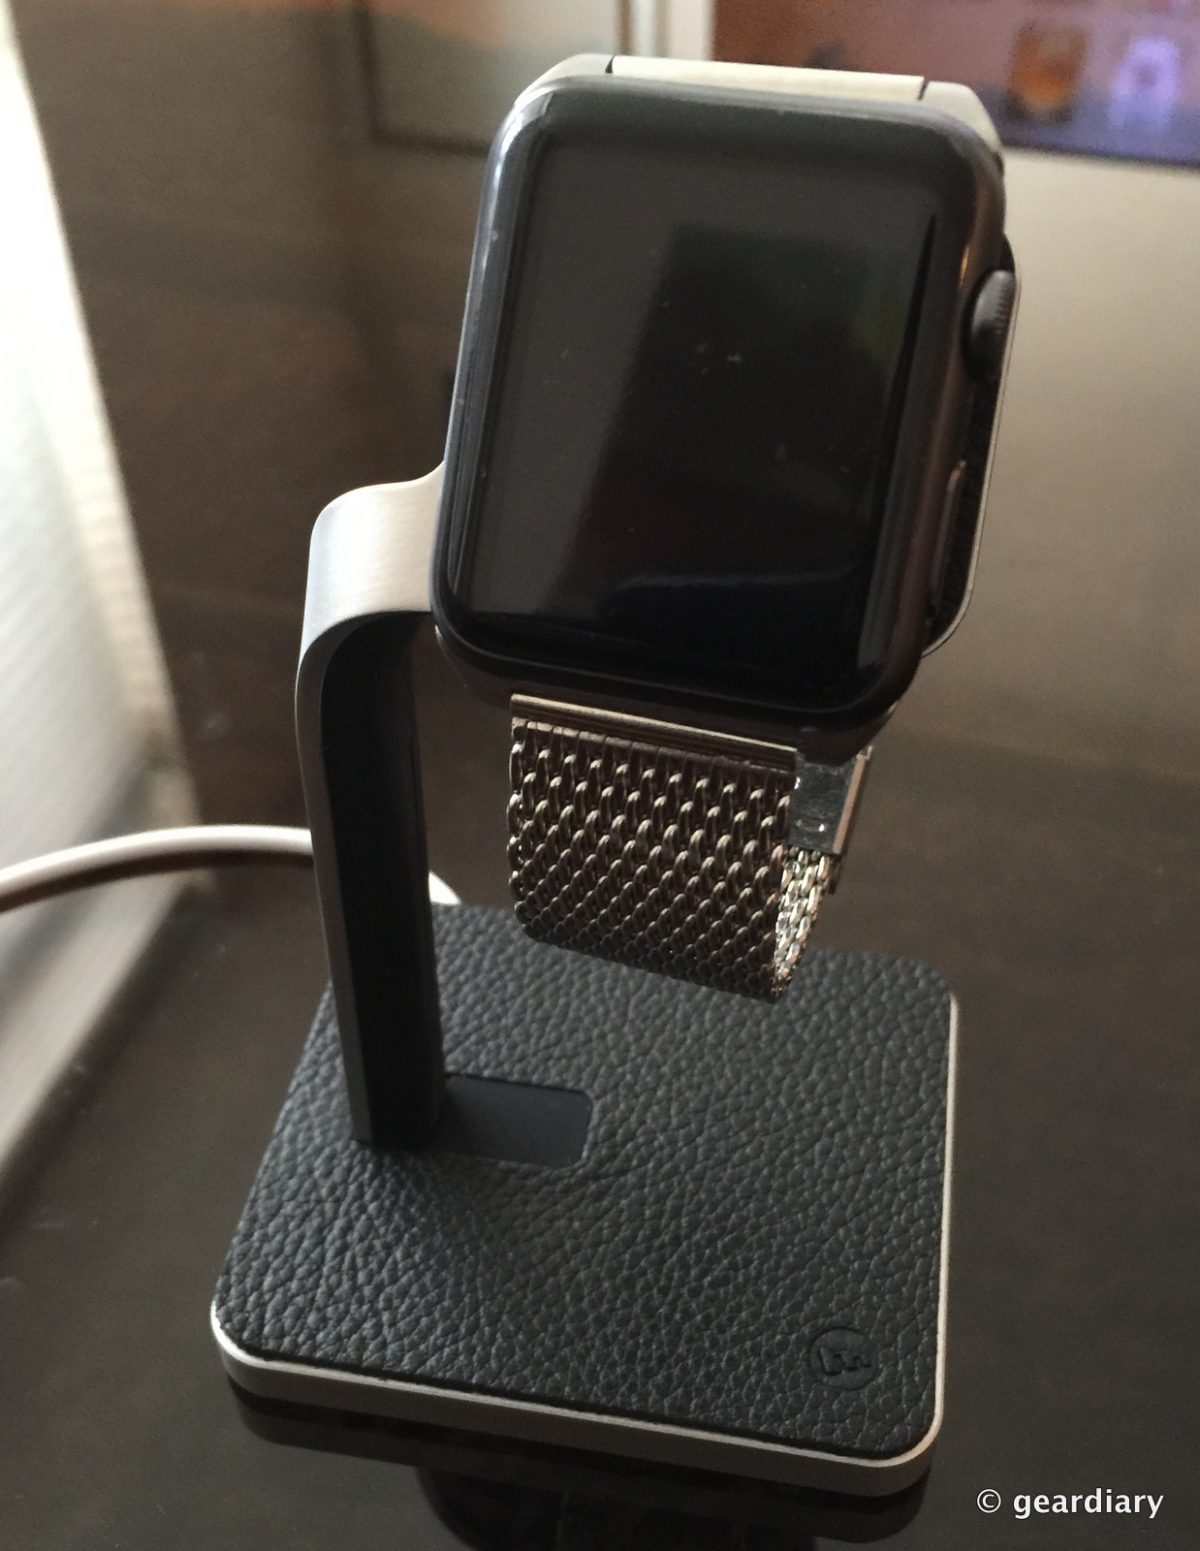 Mophie's Watch Dock Is One of the More Elegant Apple Watch Docks Available